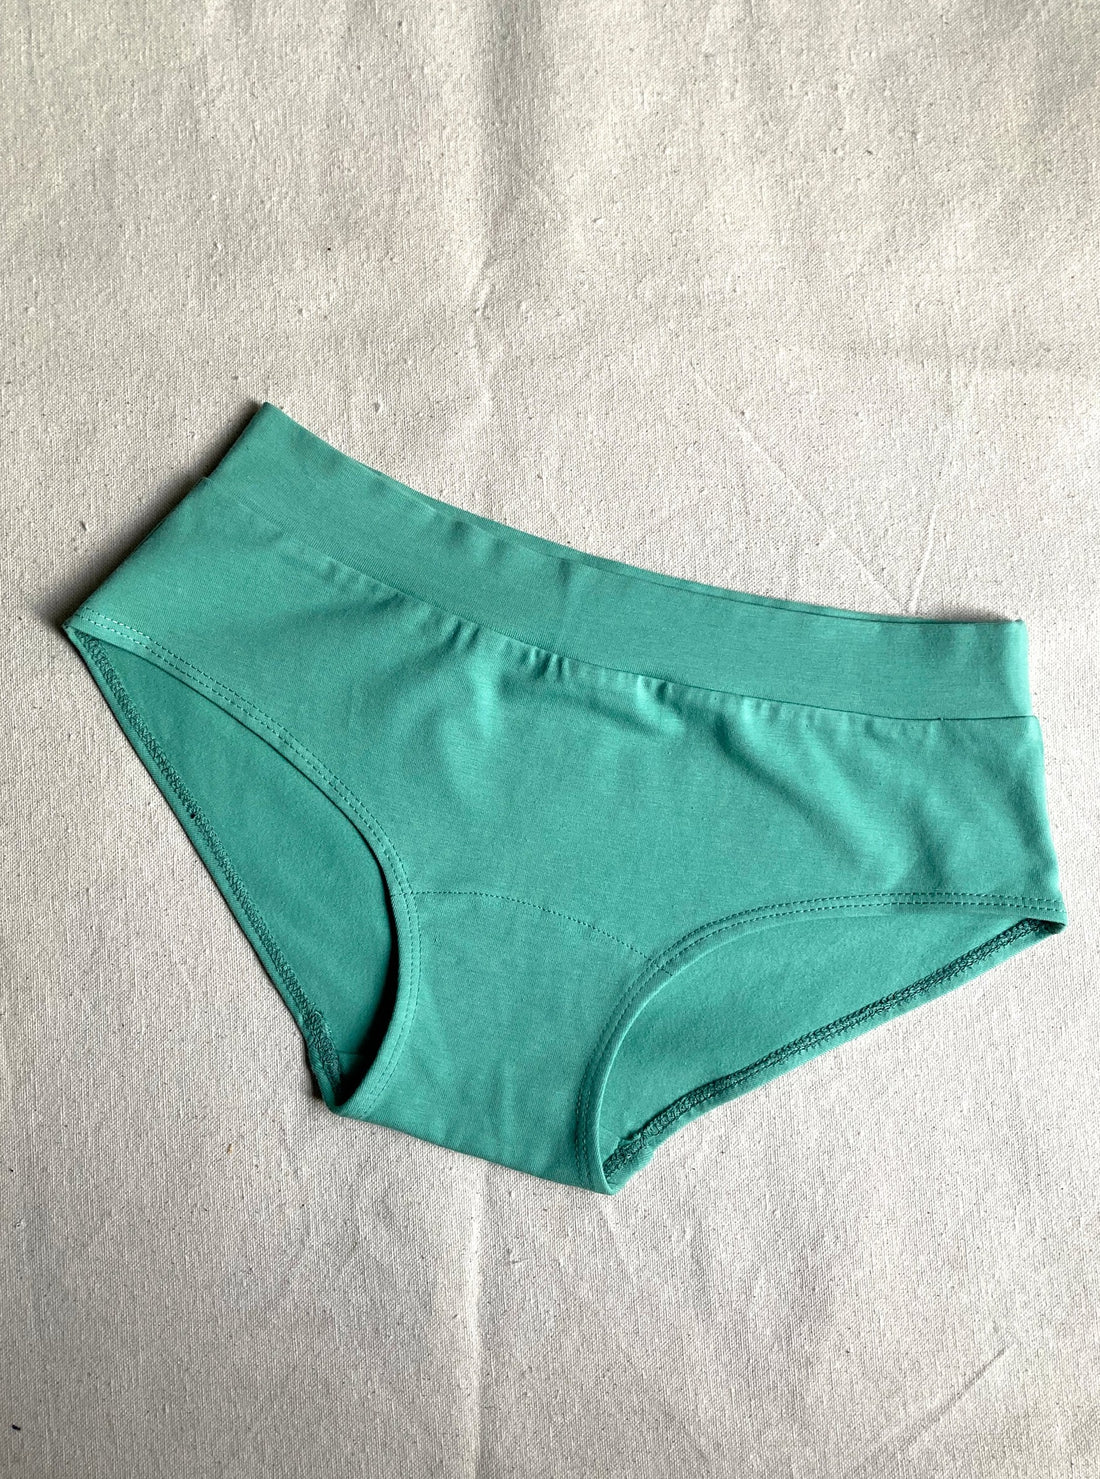 Women's Cotton Mid Waist Panty Combo in Mint Green & Wine Color Color